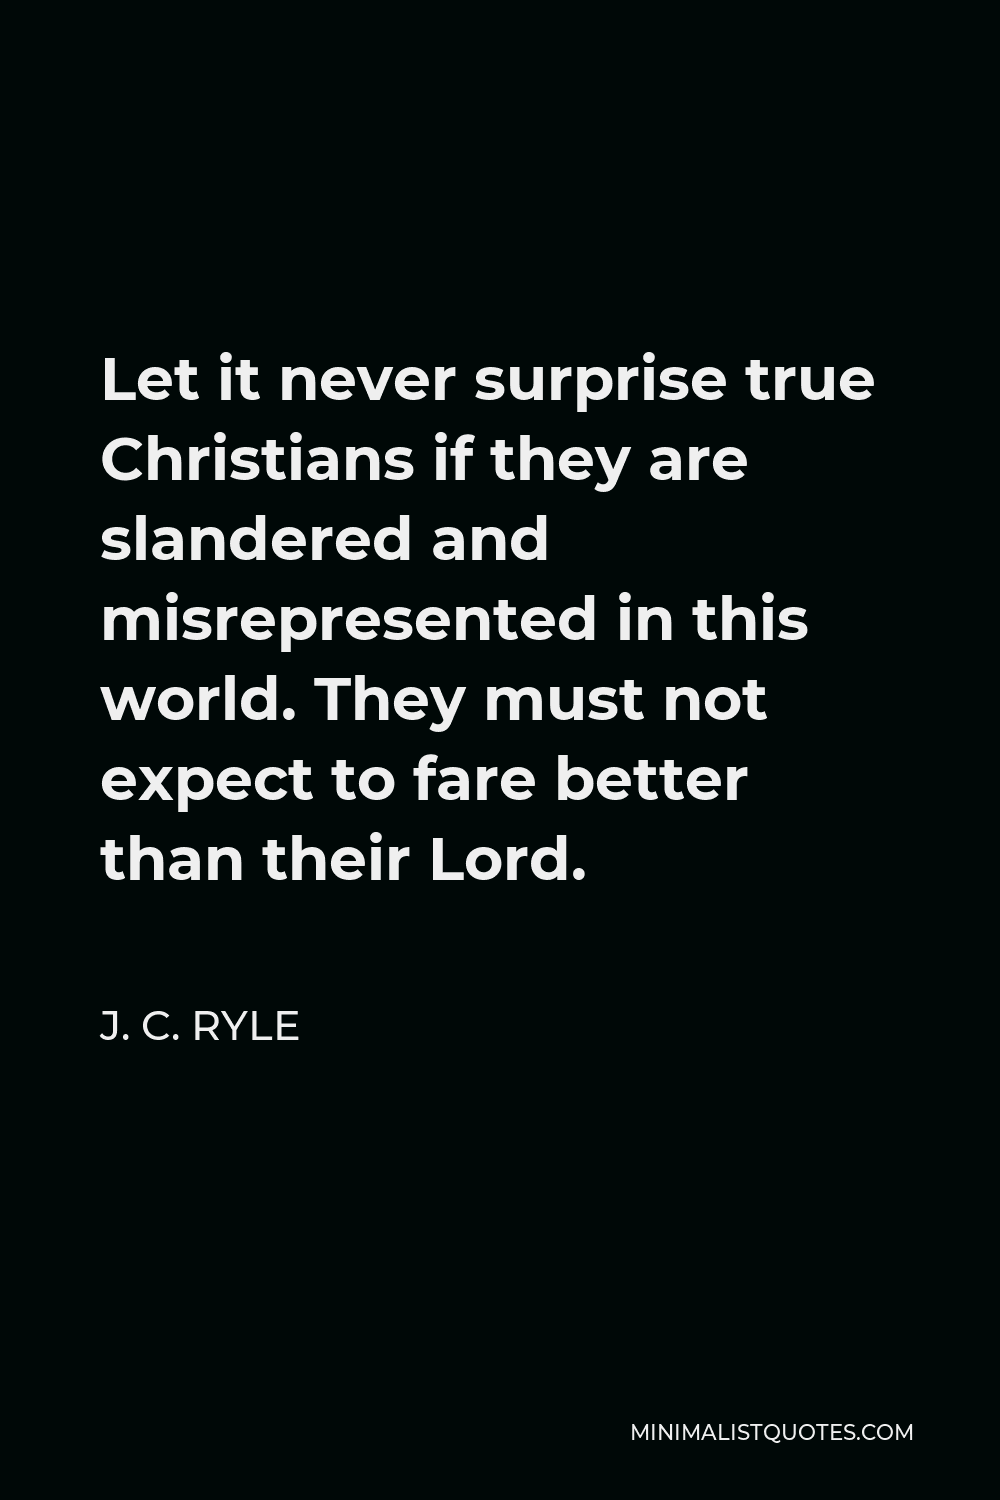 J. C. Ryle Quote - Let it never surprise true Christians if they are slandered and misrepresented in this world. They must not expect to fare better than their Lord.